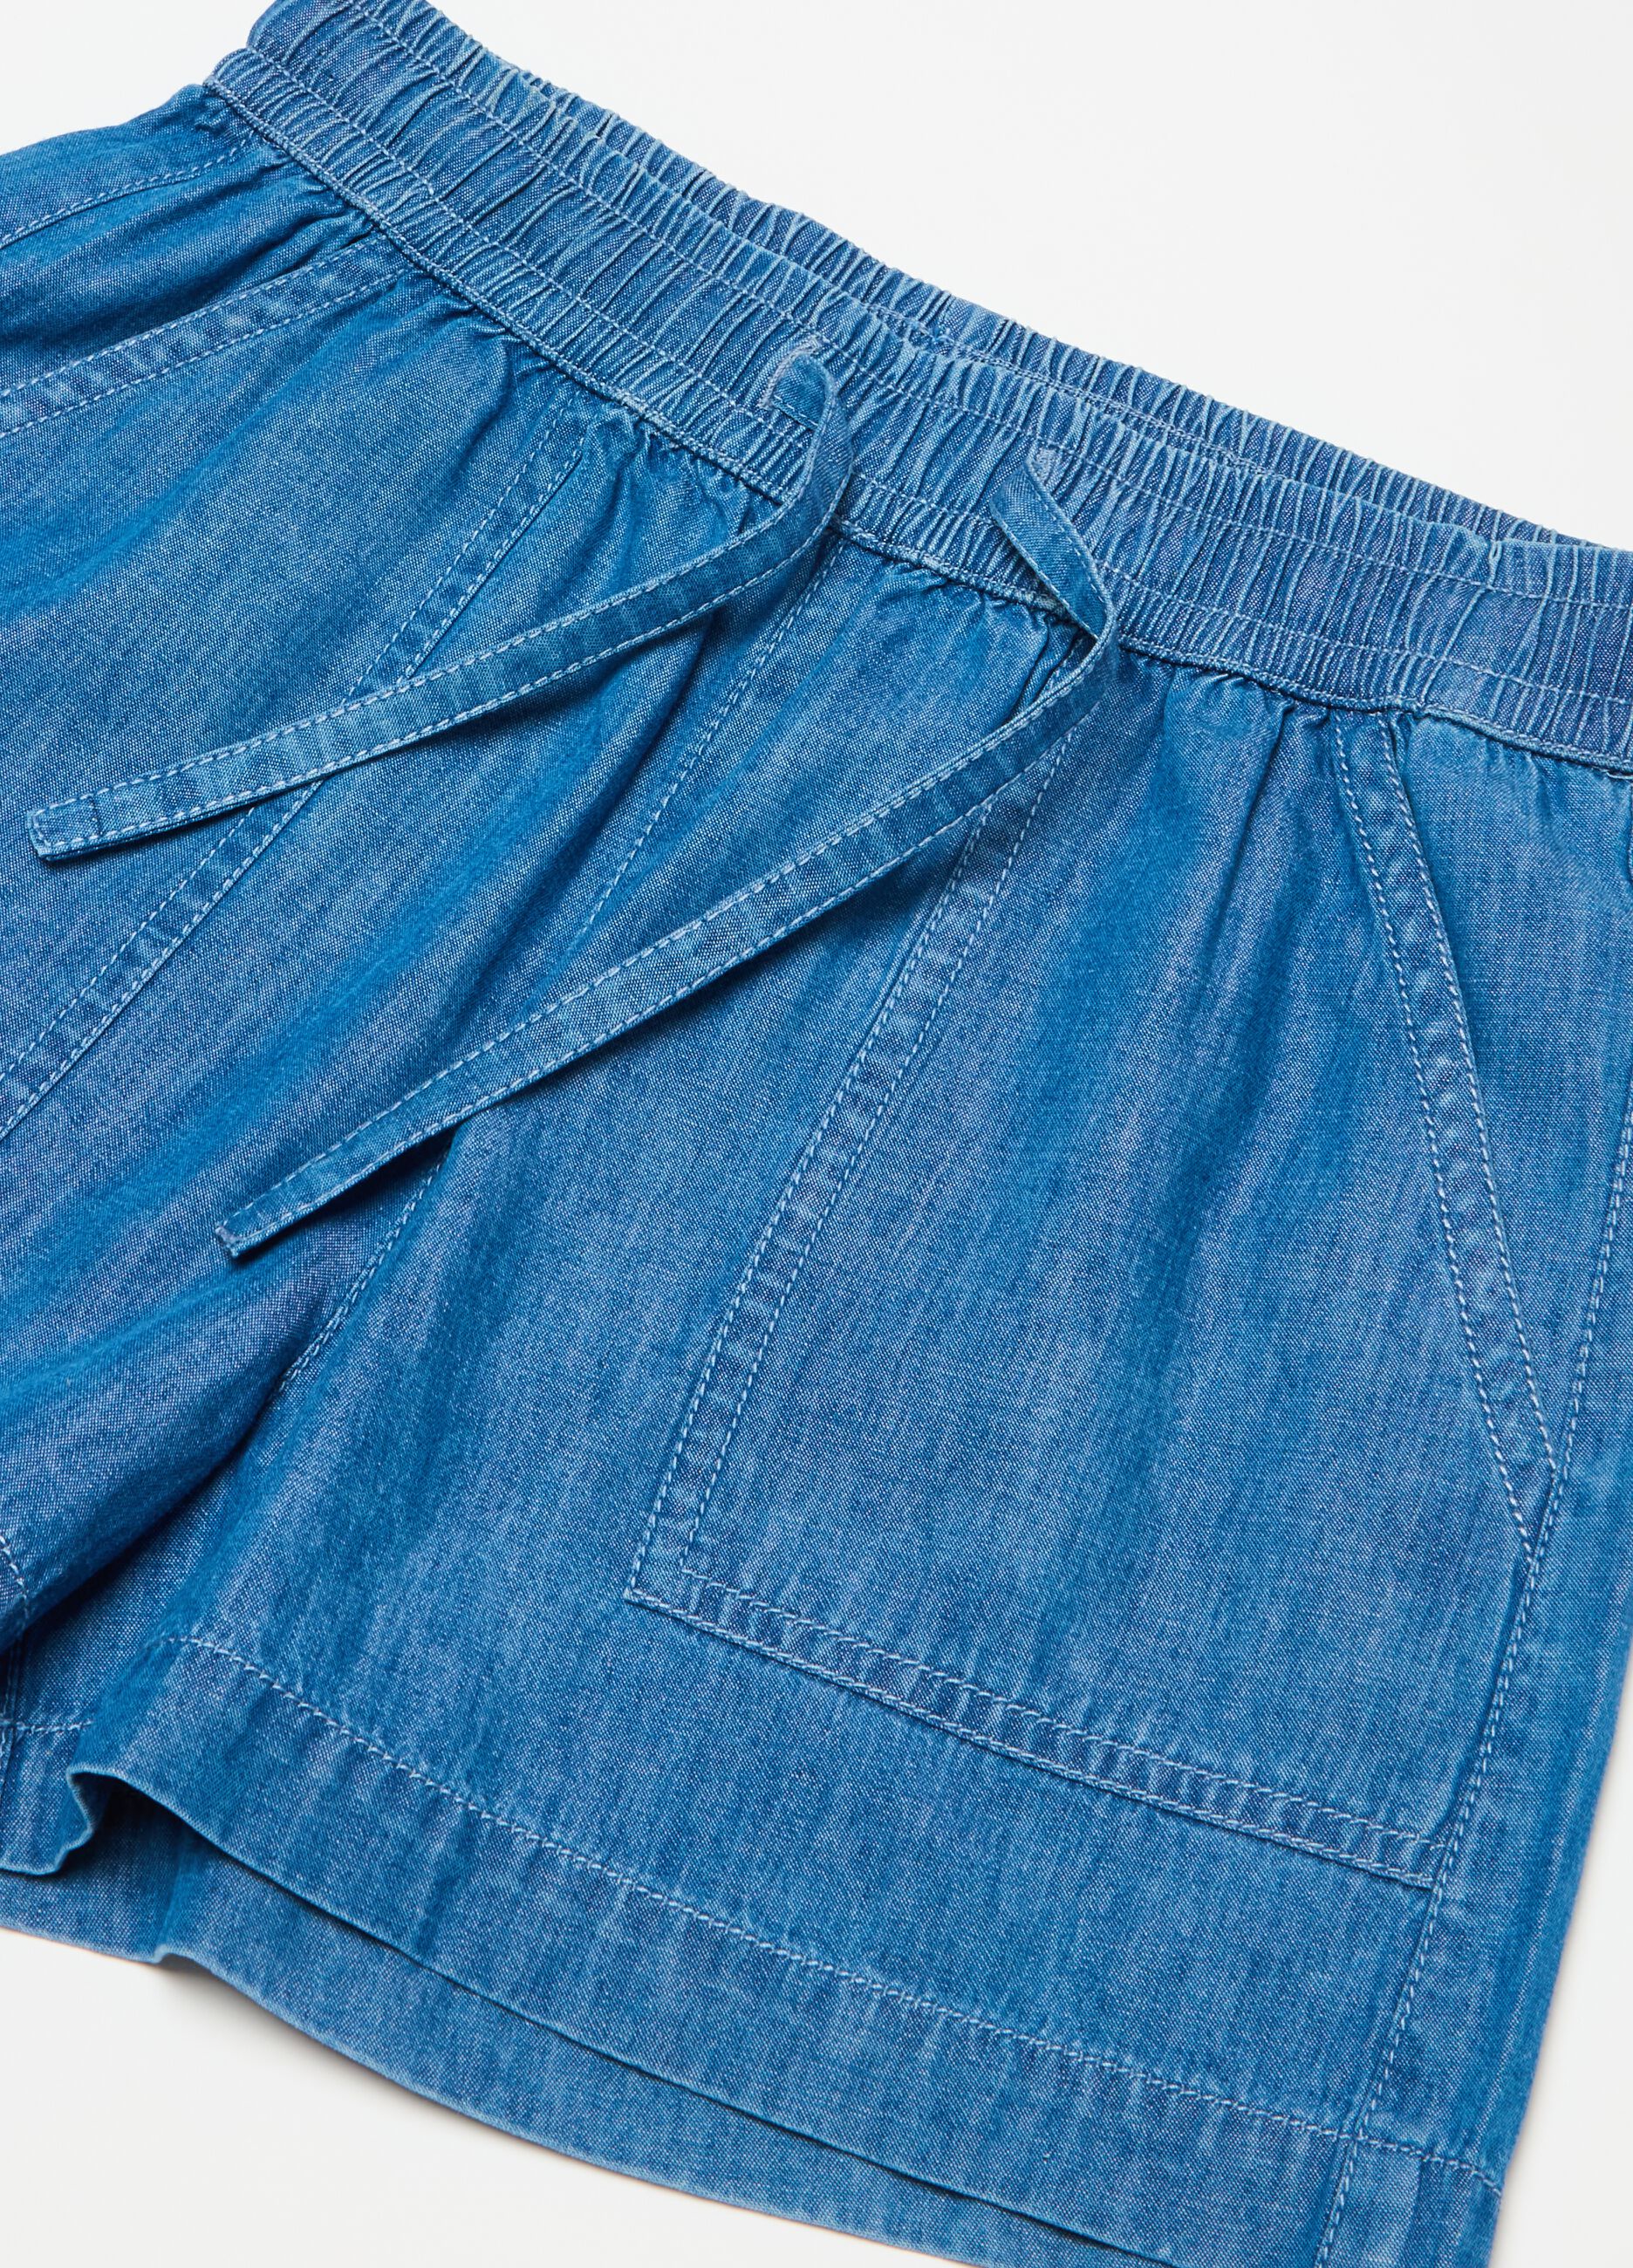 Shorts fluido in denim con coulisse